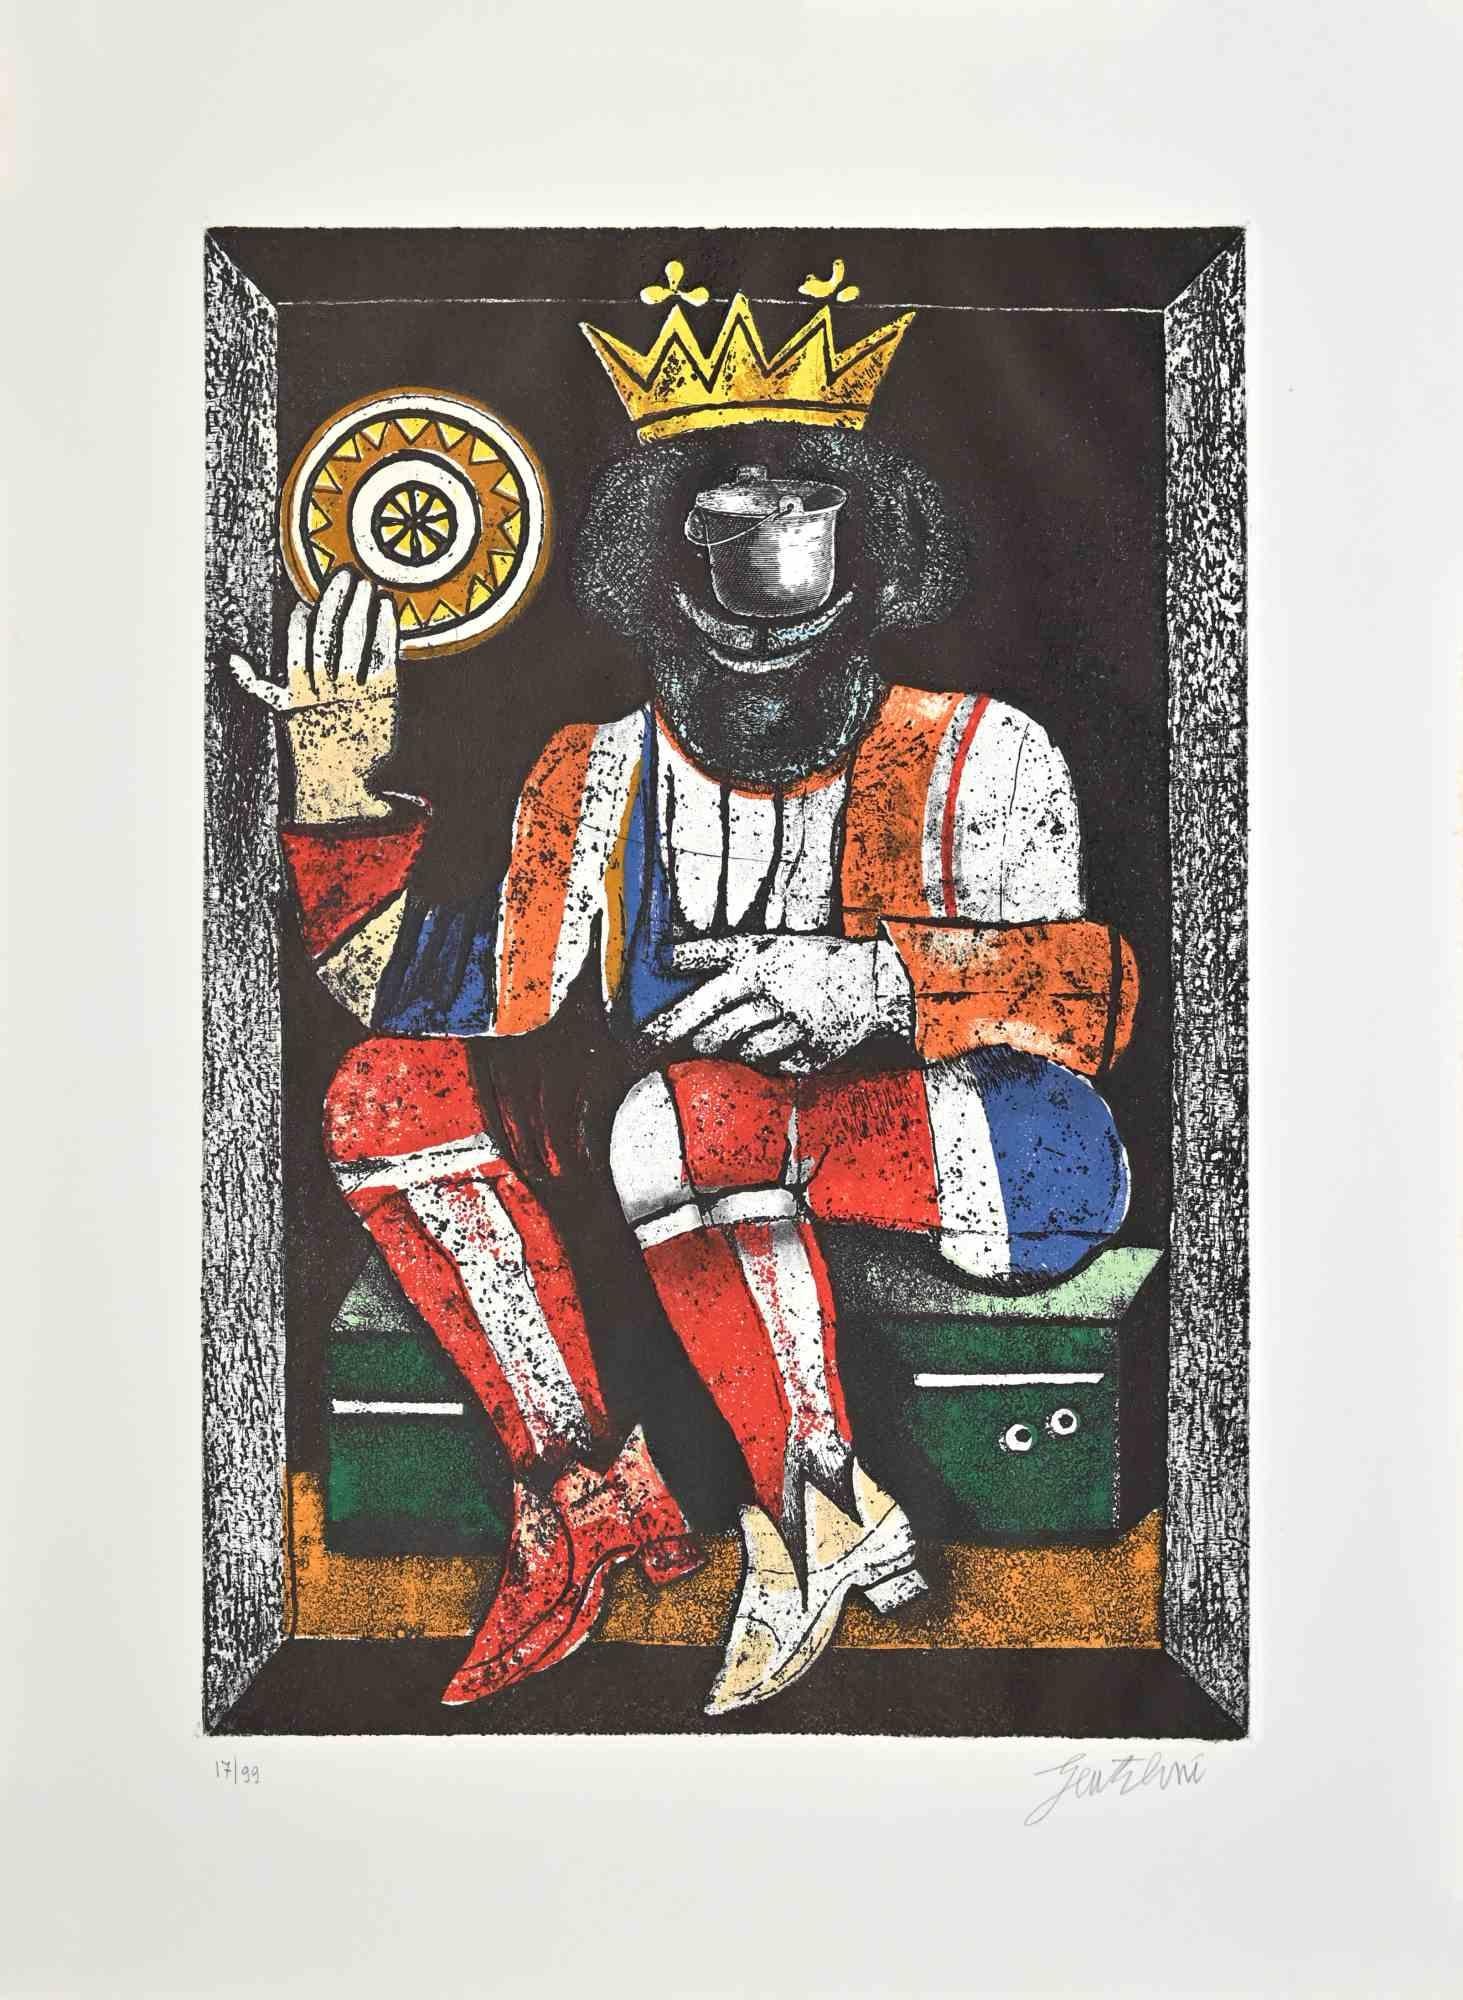 King of Coins - Etching by Franco Gentilini - 1970s